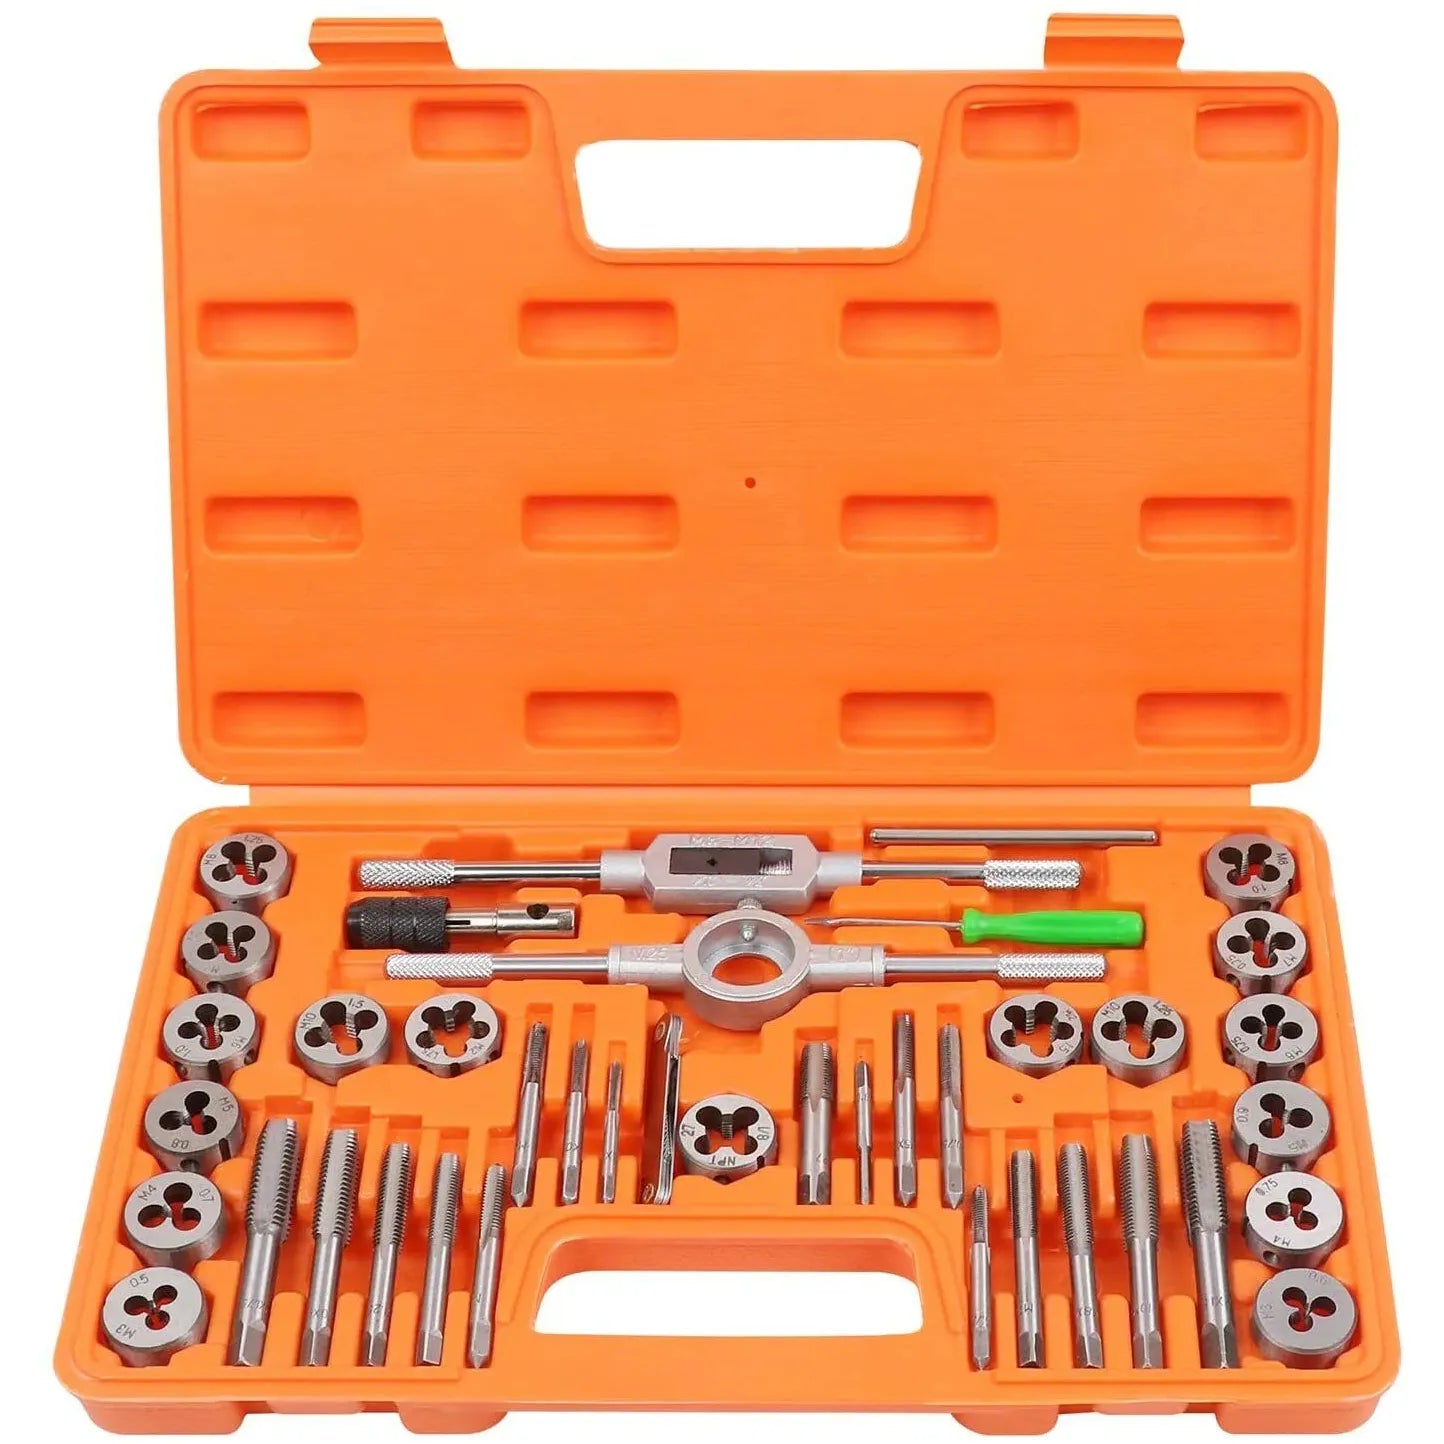 40 Piece Tap And Die Set Metric Szie Screw Screwdriver Thread Drill W/t Pitch Gauge - South East Clearance Centre